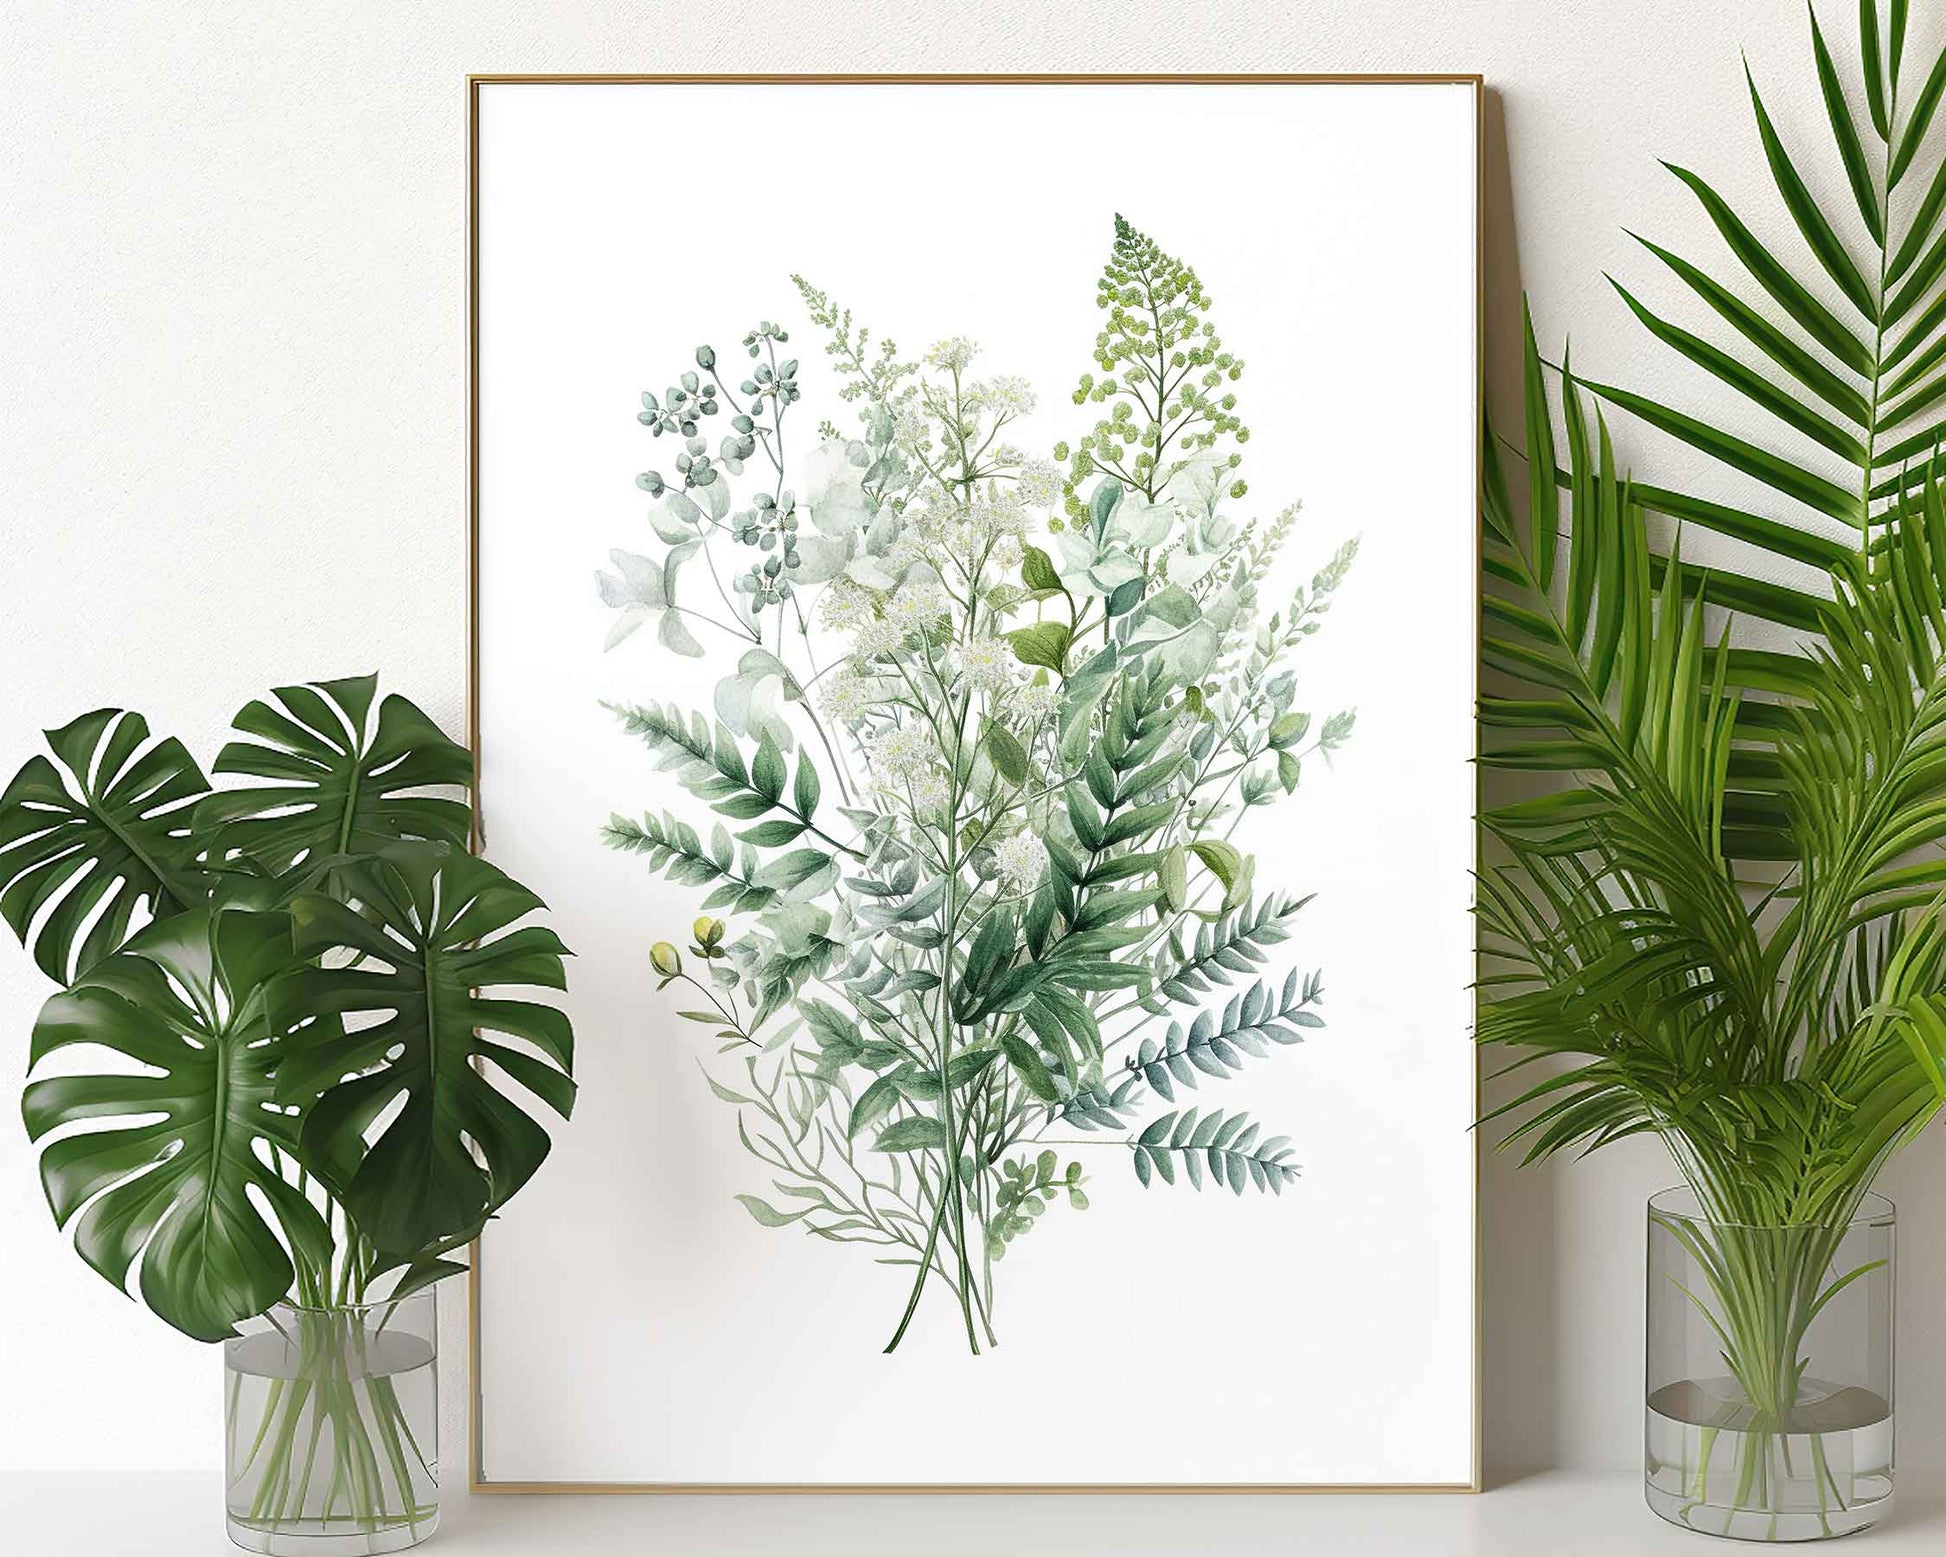 Framed Image of Botanical Art Wall Poster of Ferns and Eucalyptus Leaf Paintings